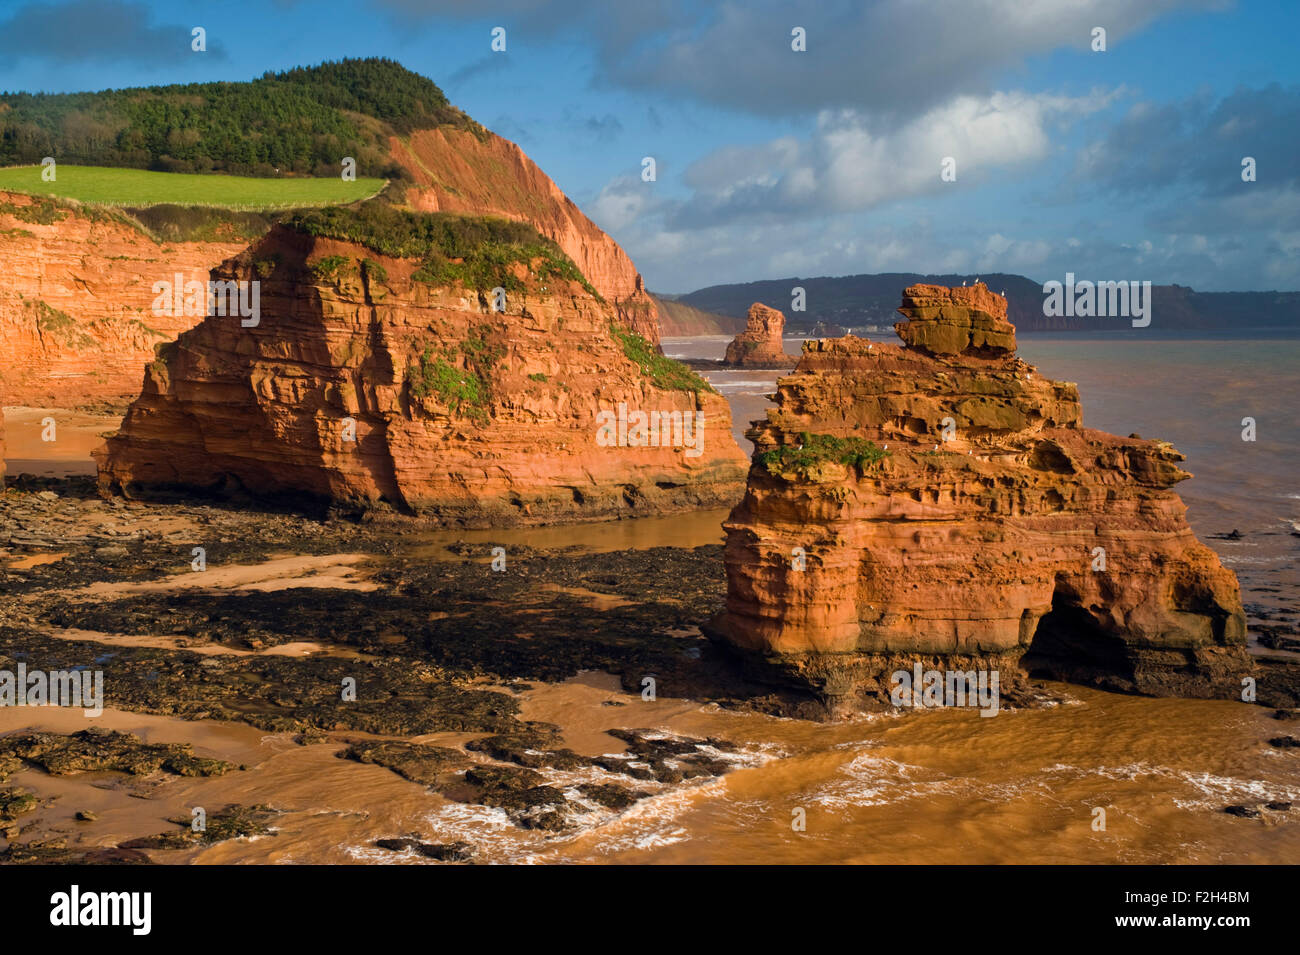 View of the red sandstone sea stacks at Ladram Bay near Sidmouth on Devon's Jurassic Coast, England, UK Stock Photo